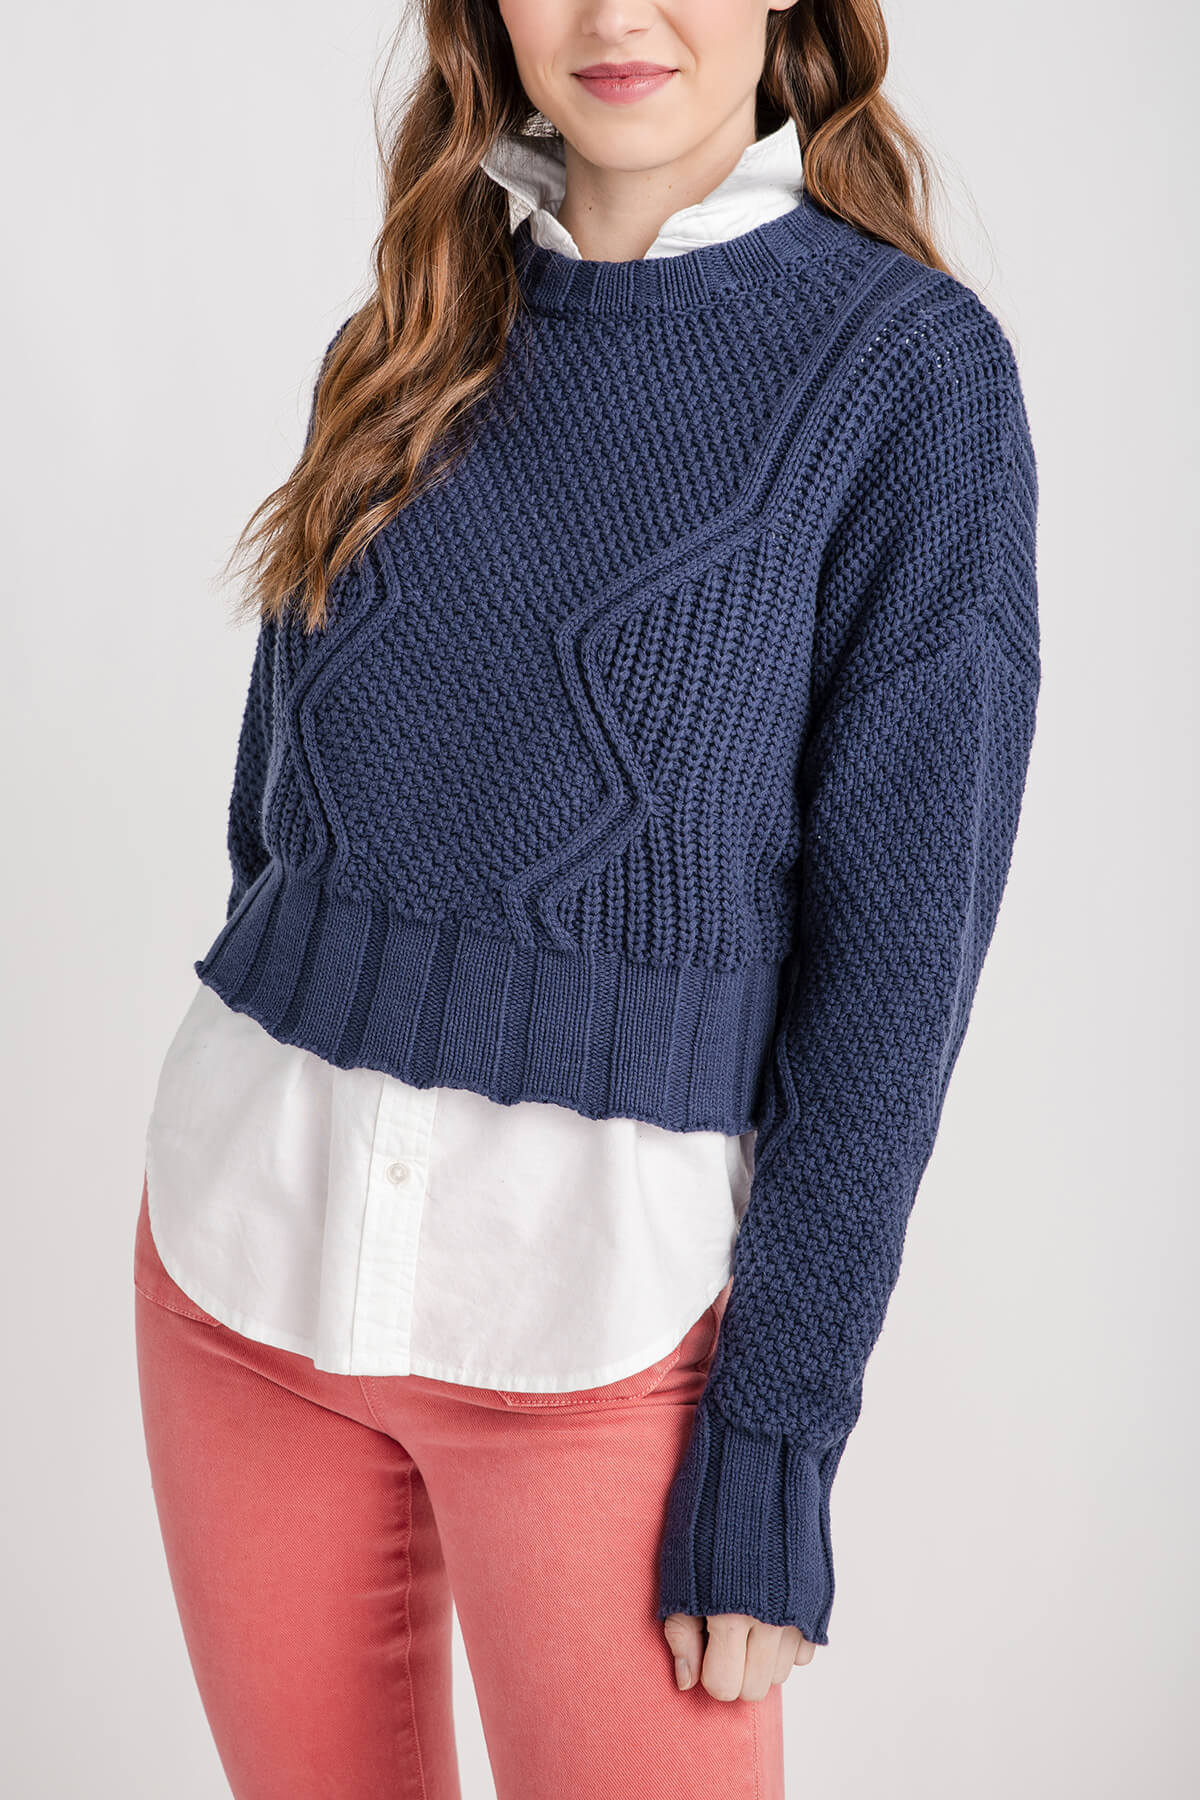 All Row Cotton Cable Sweater